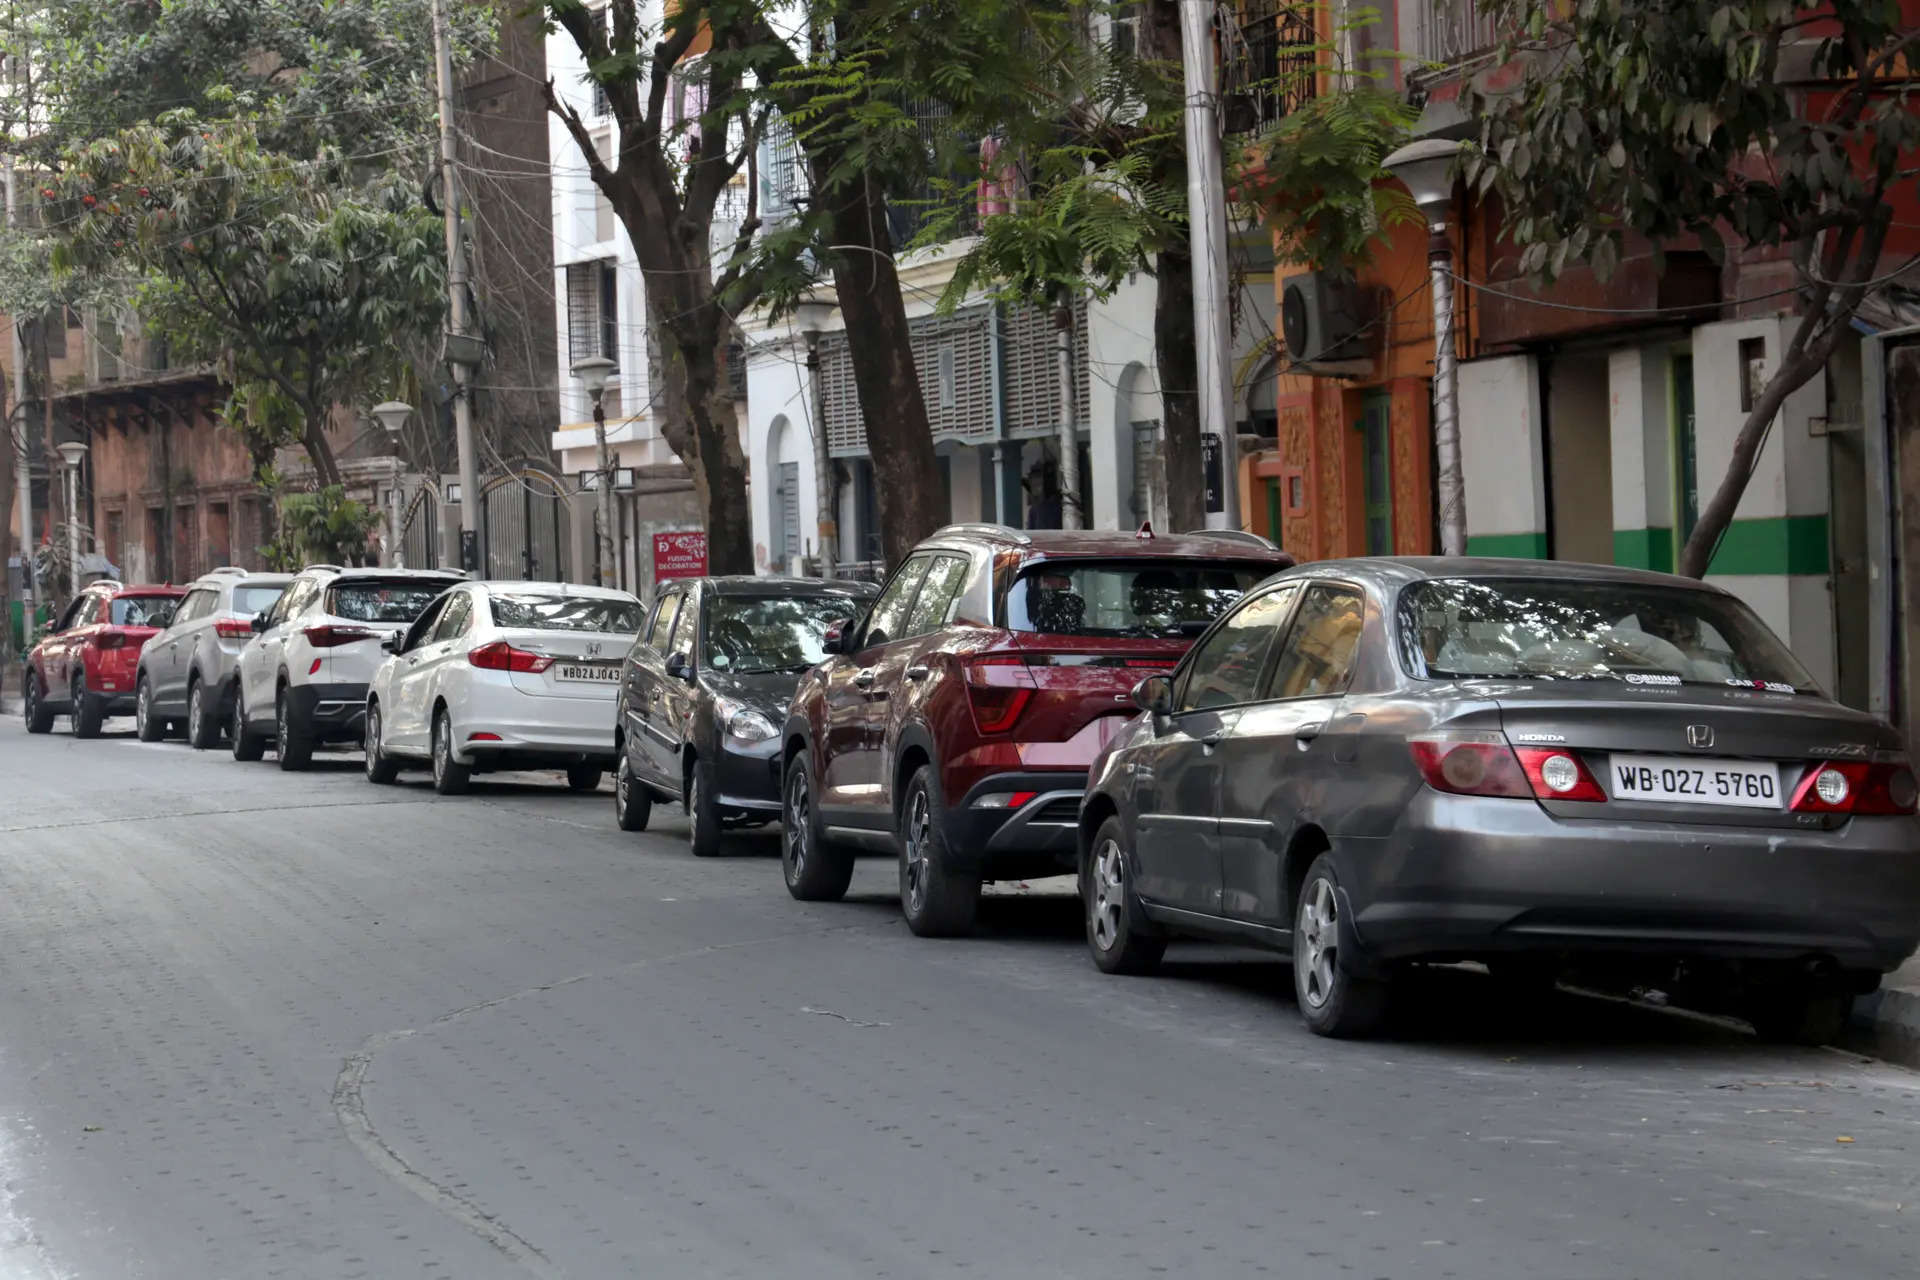 Parking pains: 23 lakh vehicles struggle with 450 legal spots in Kolkata